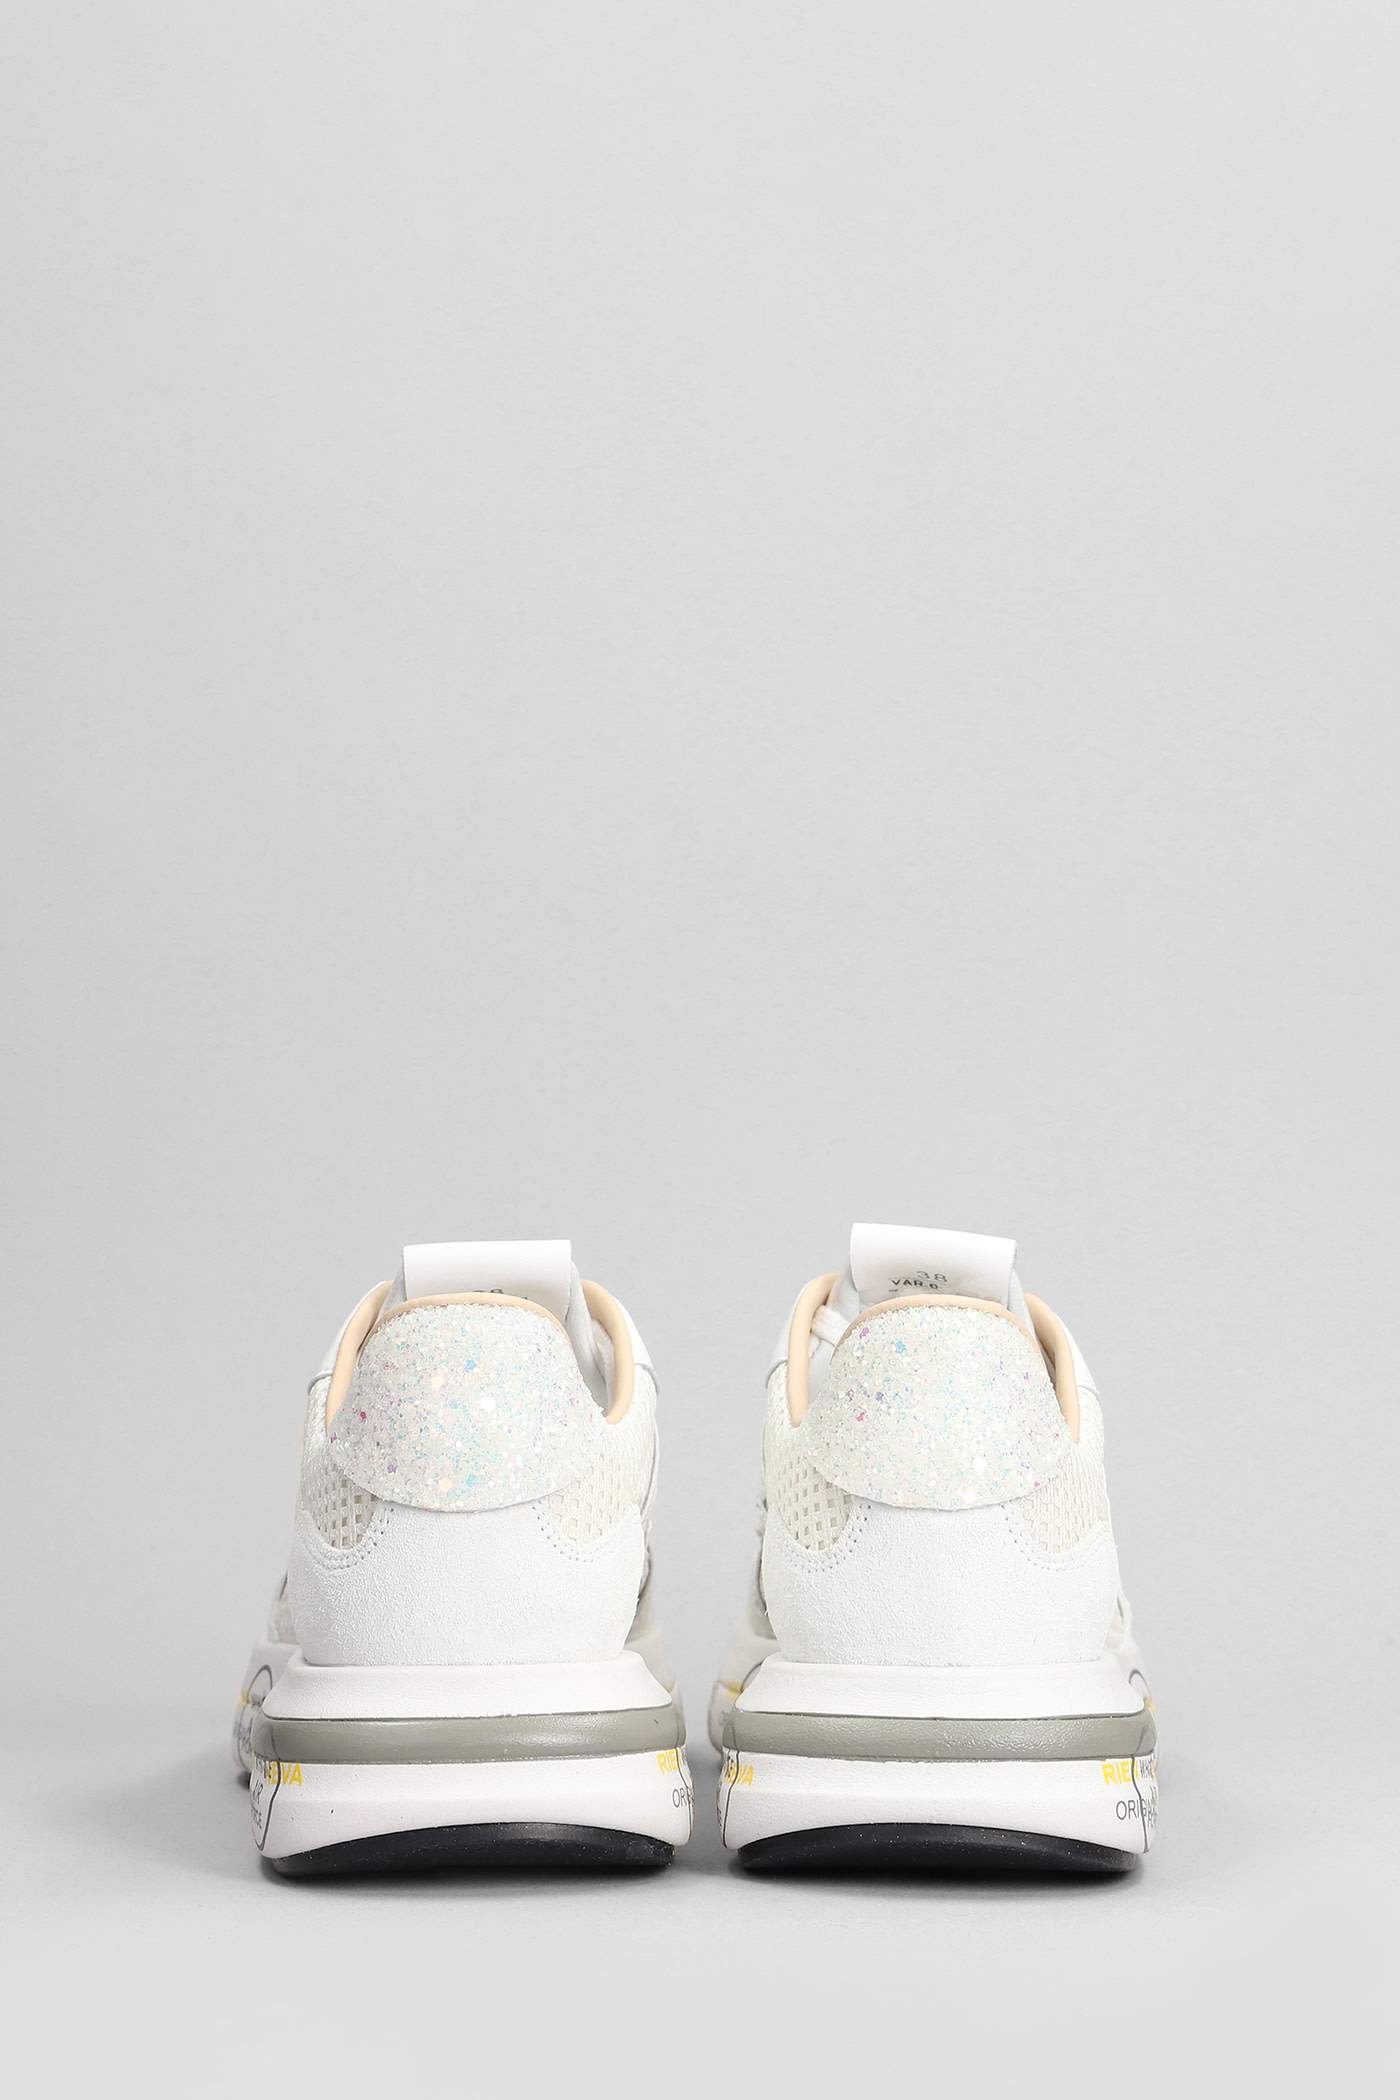 Shop Premiata Cassie Sneakers In White Suede And Fabric